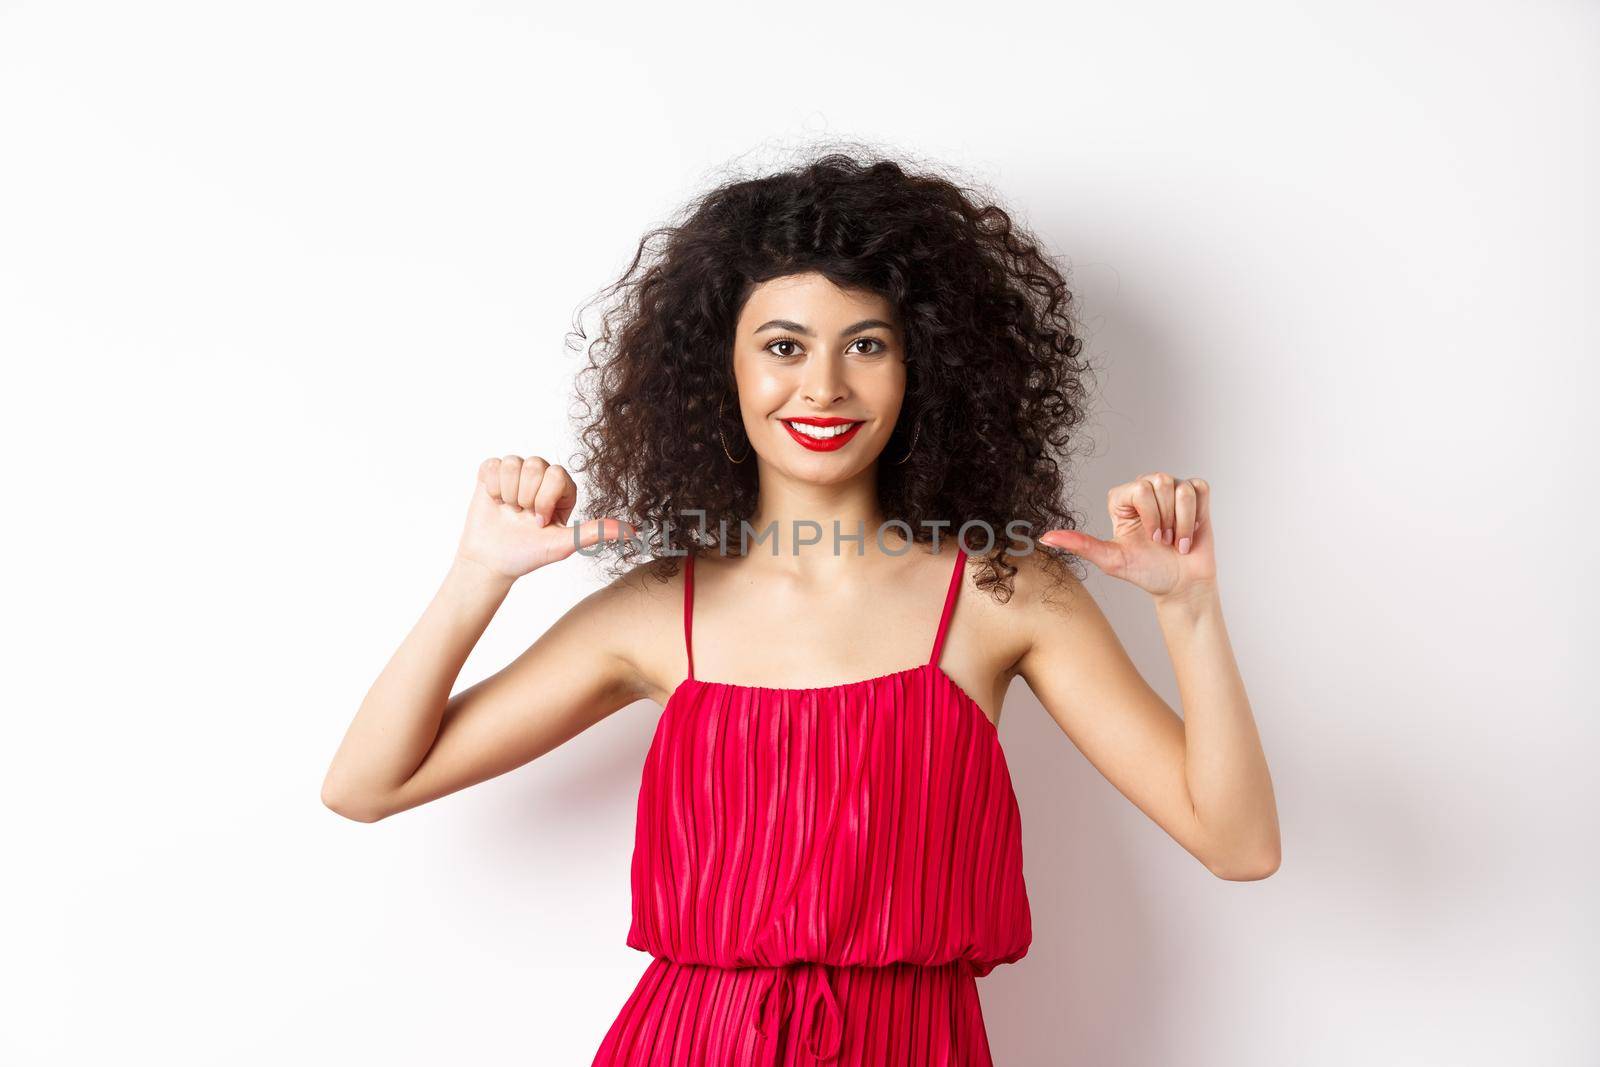 Confident young woman in elegant red dress, pointing at herself and smiling, self-promoting, standing over white background.